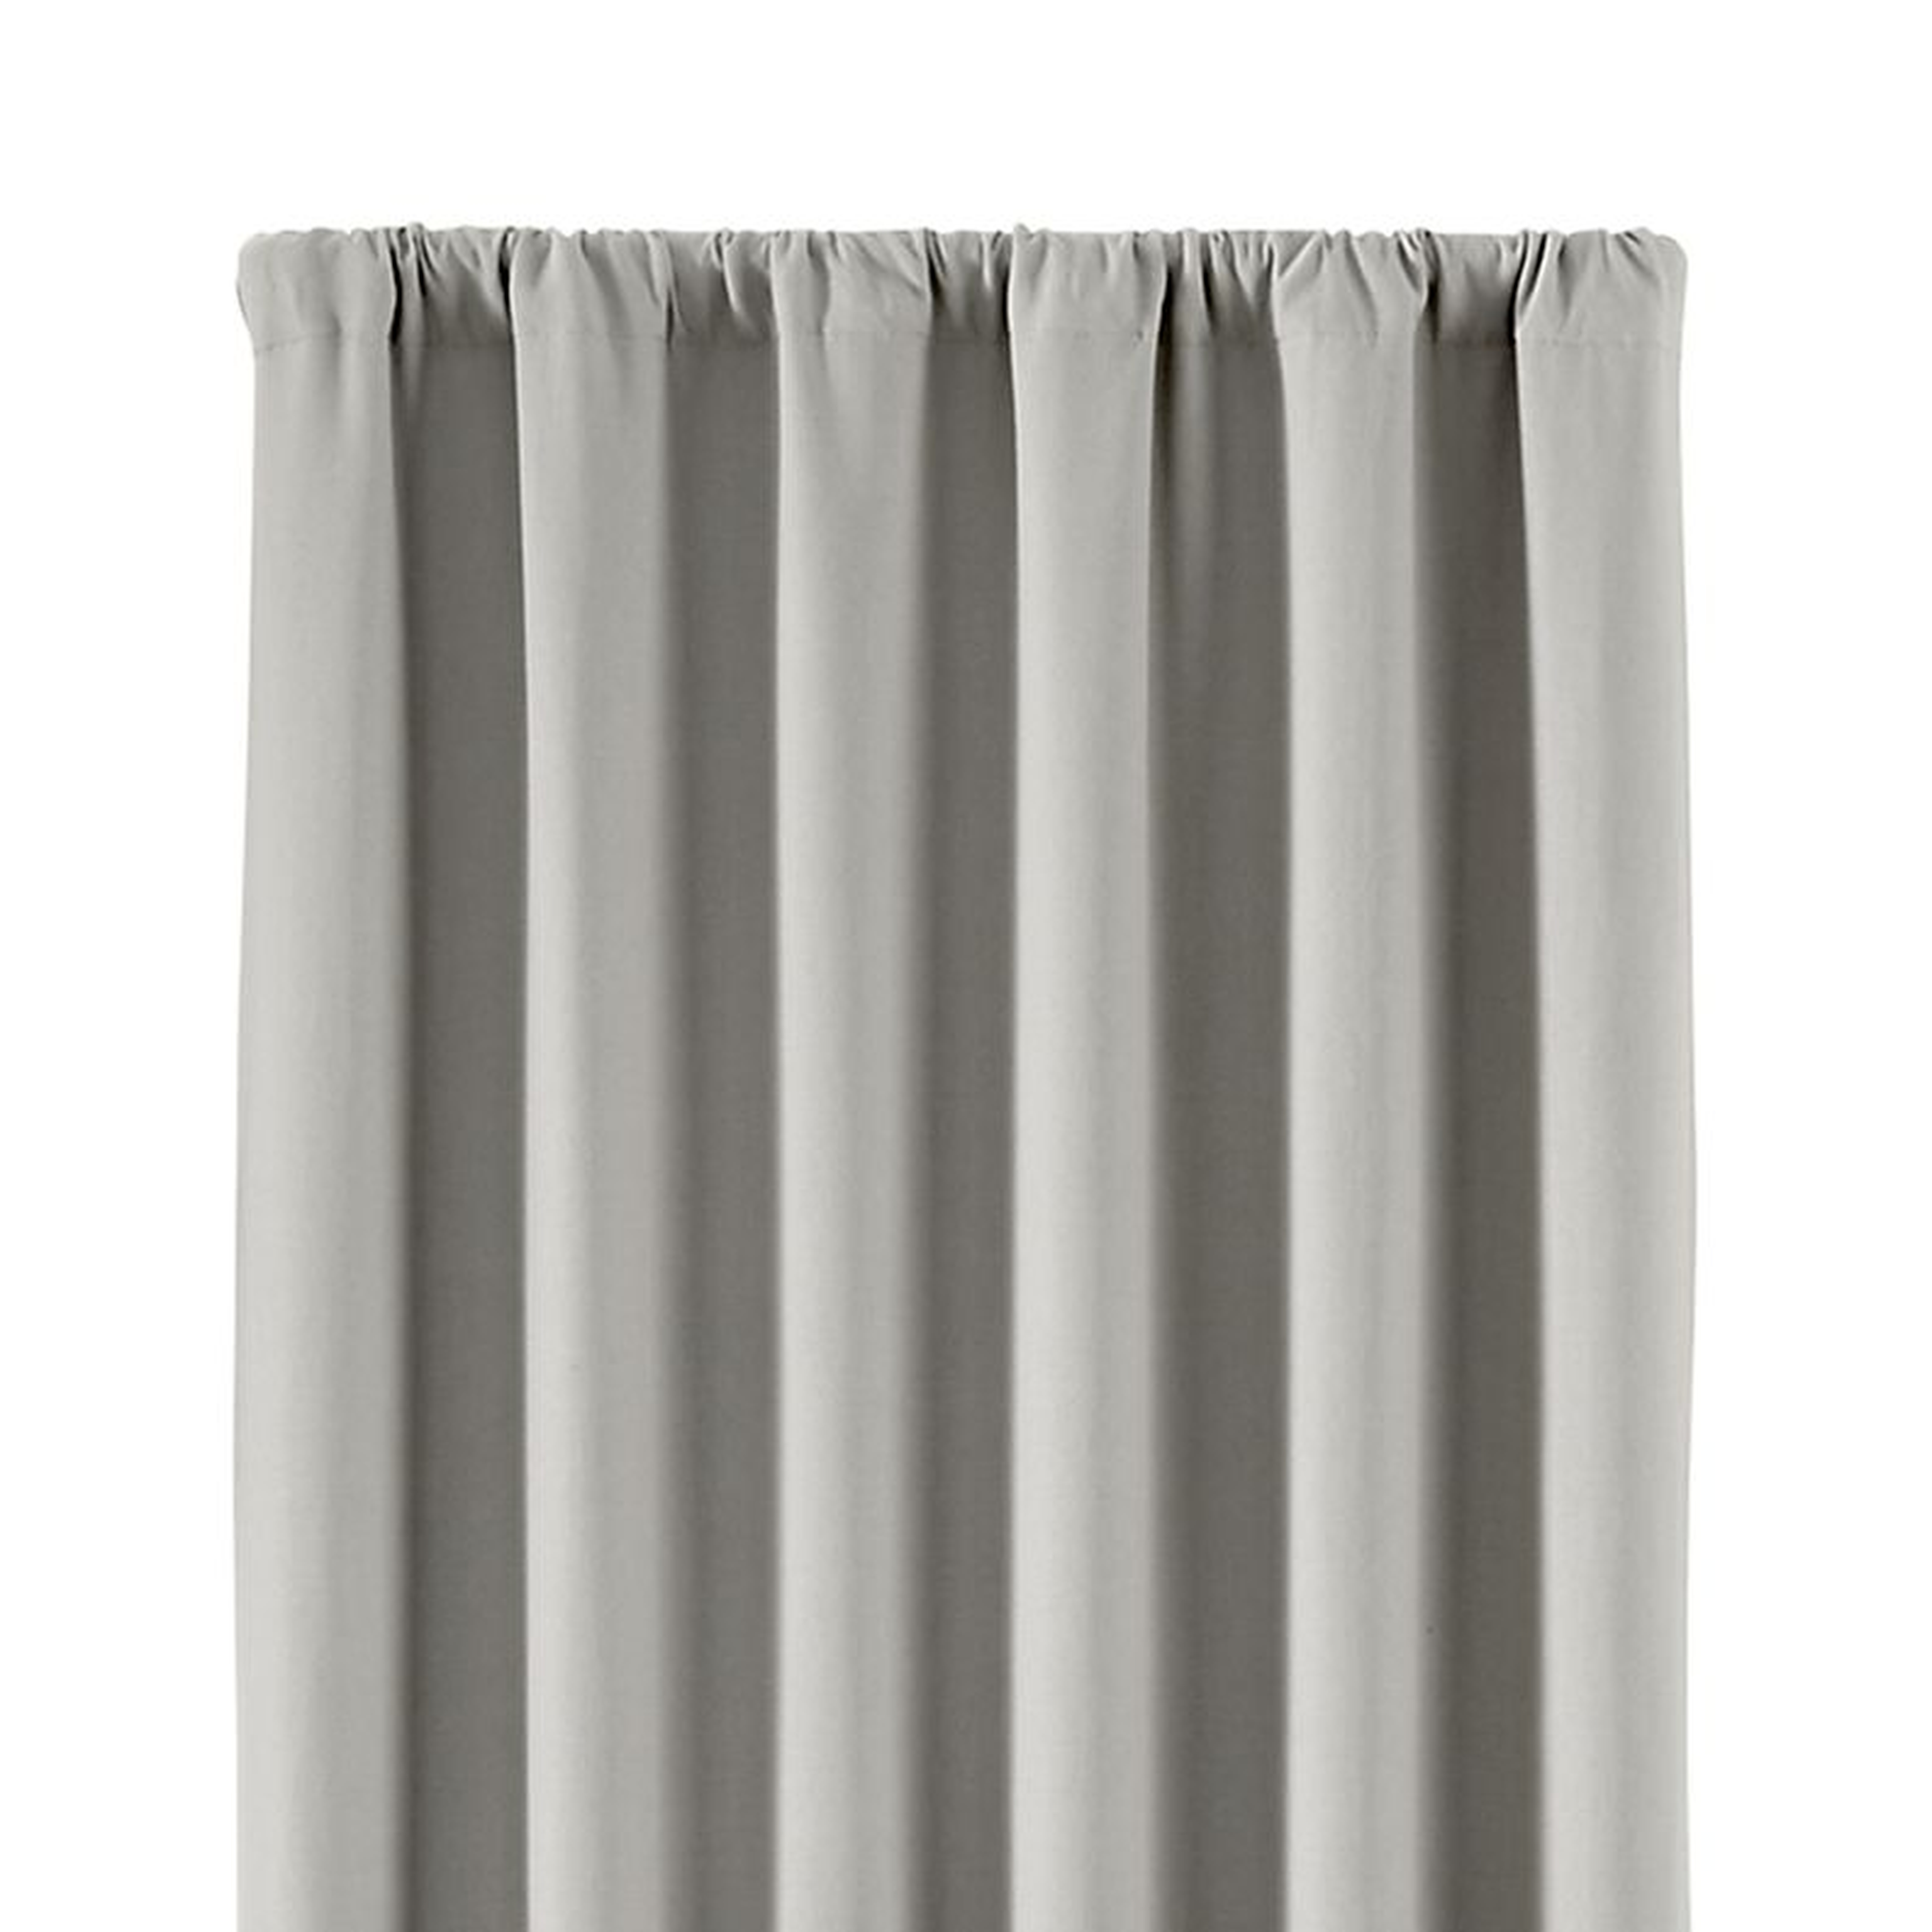 Wallace Blackout Curtain Panel - 84" - Grey - Crate and Barrel